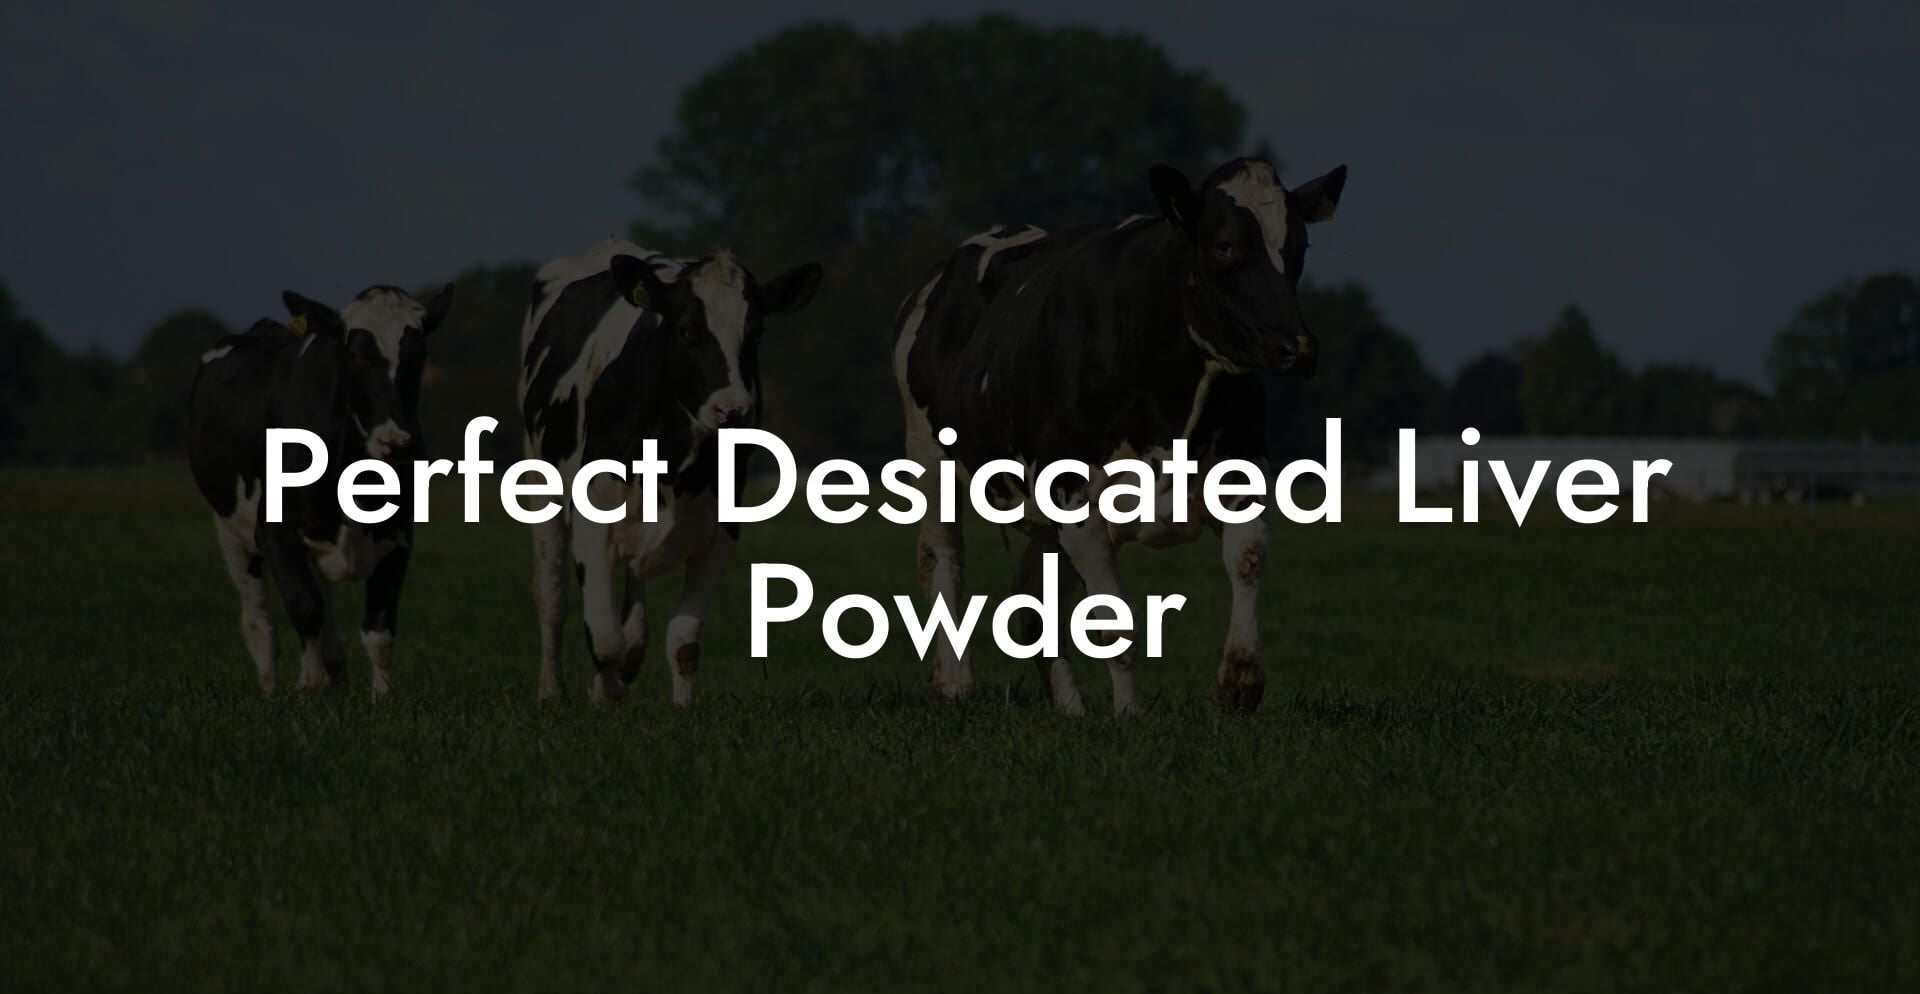 Perfect Desiccated Liver Powder